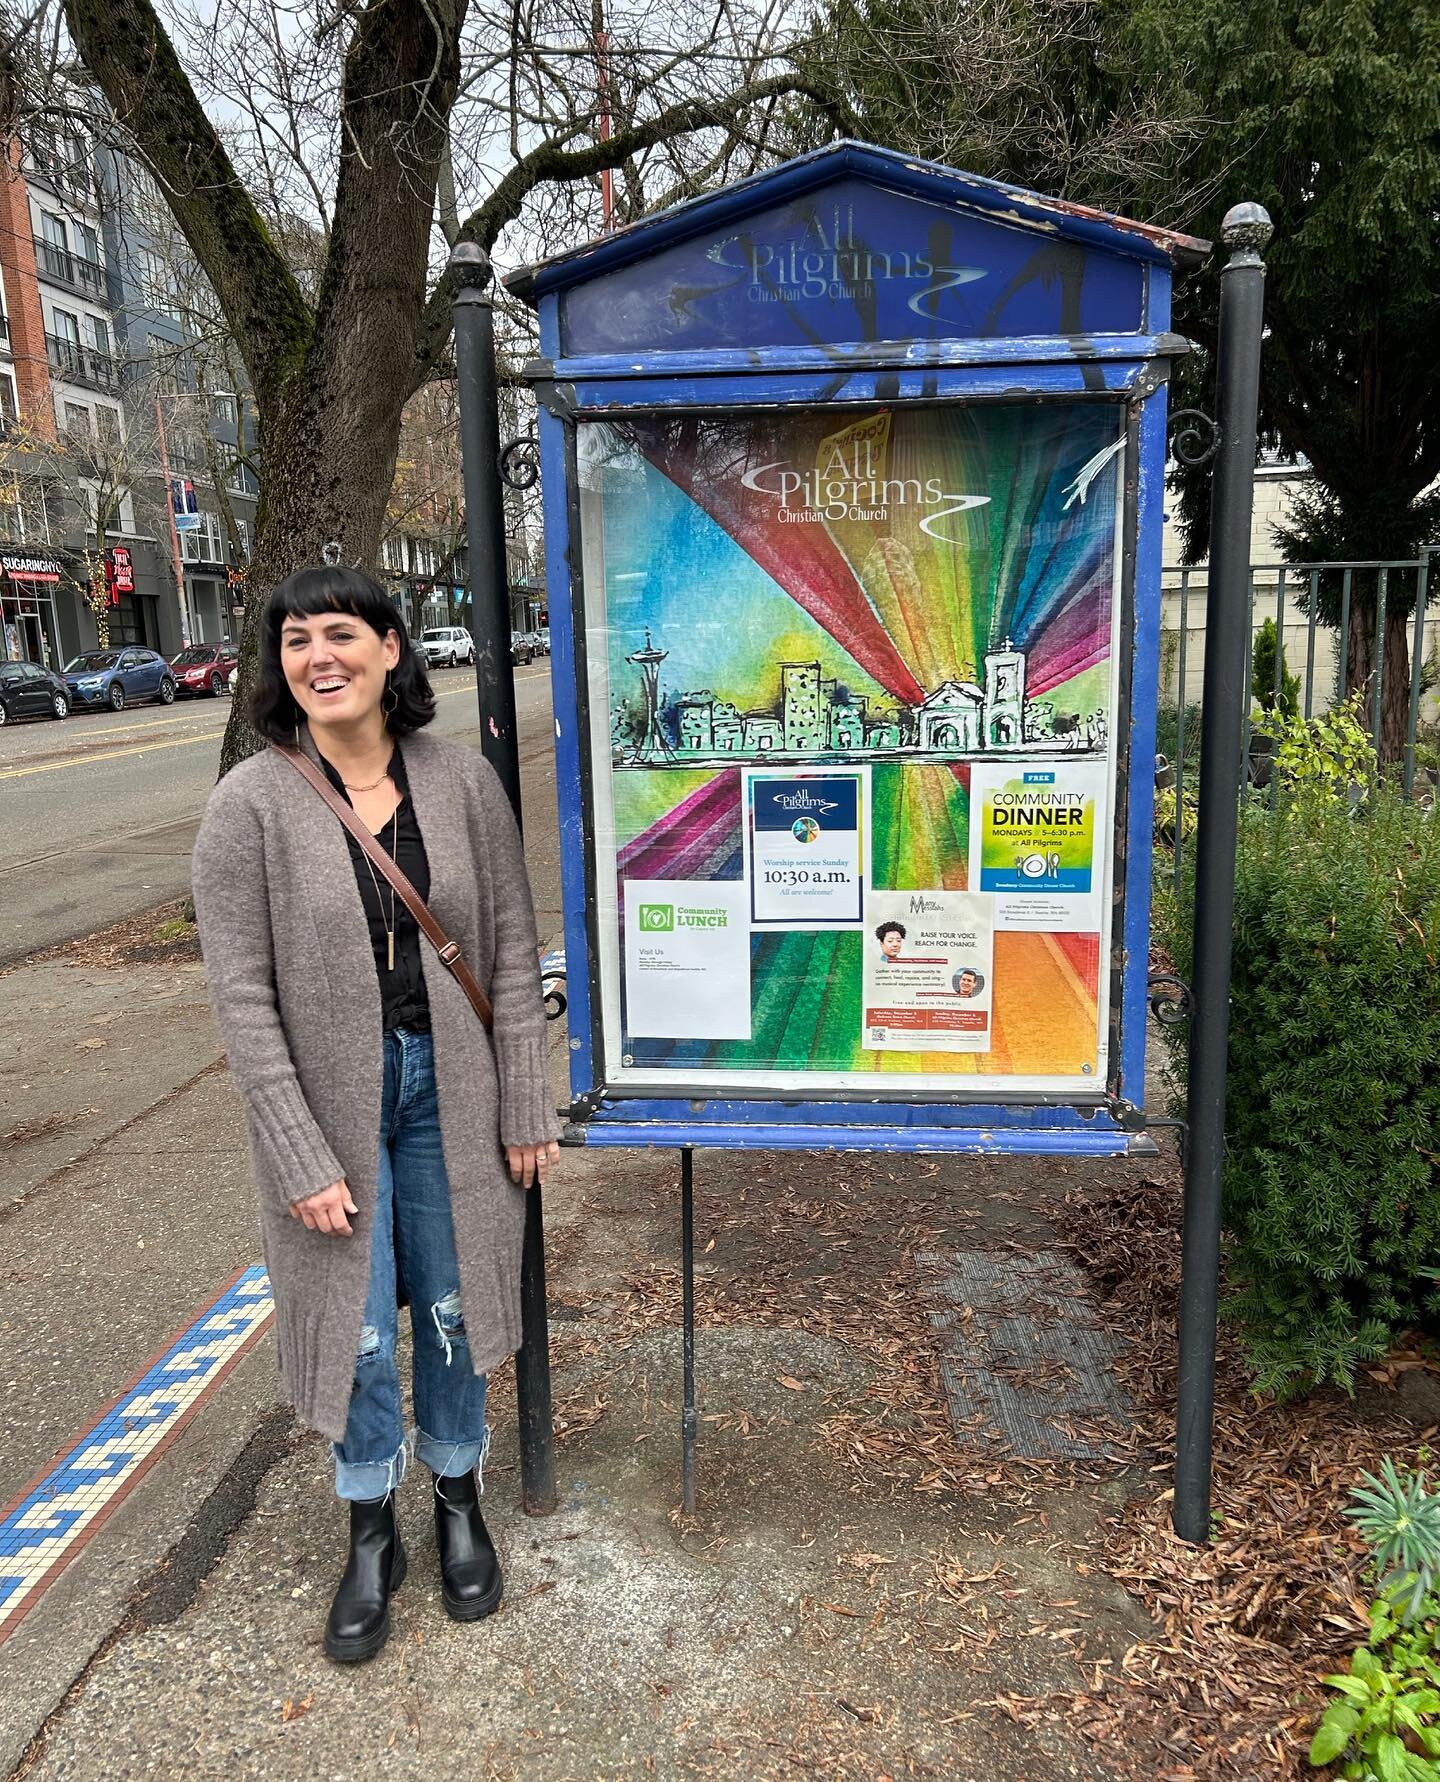 So excited to use my art to brighten up Broadway! I had no idea this painting from almost a year ago would come in handy for some new signs at All Pilgrims! I hope this art helps communicate the openness of a community where LGBTQIA+ people are fully